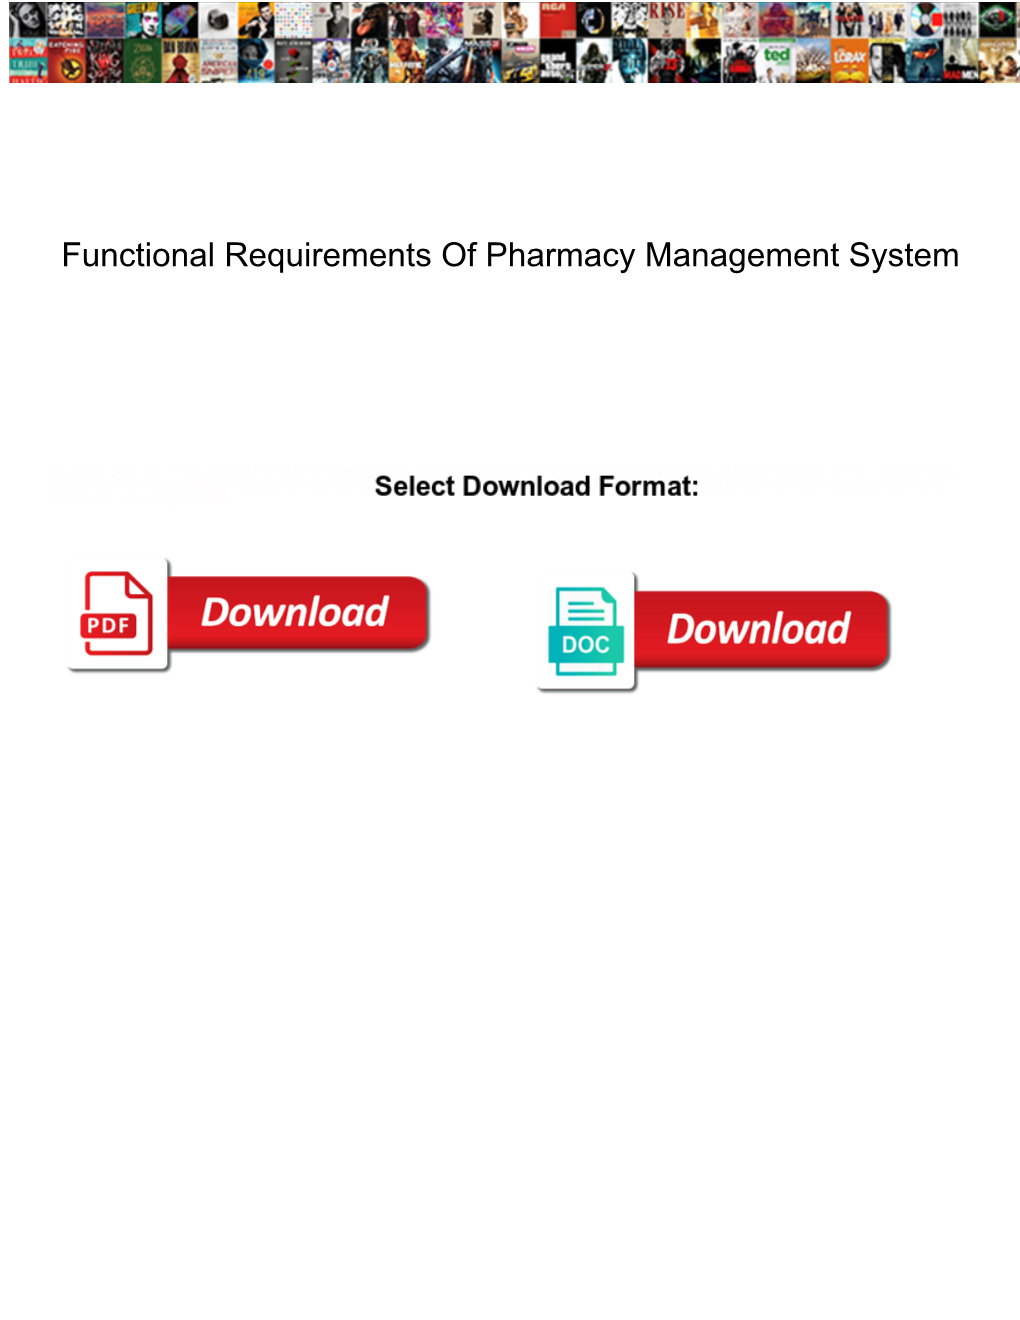 Functional Requirements of Pharmacy Management System